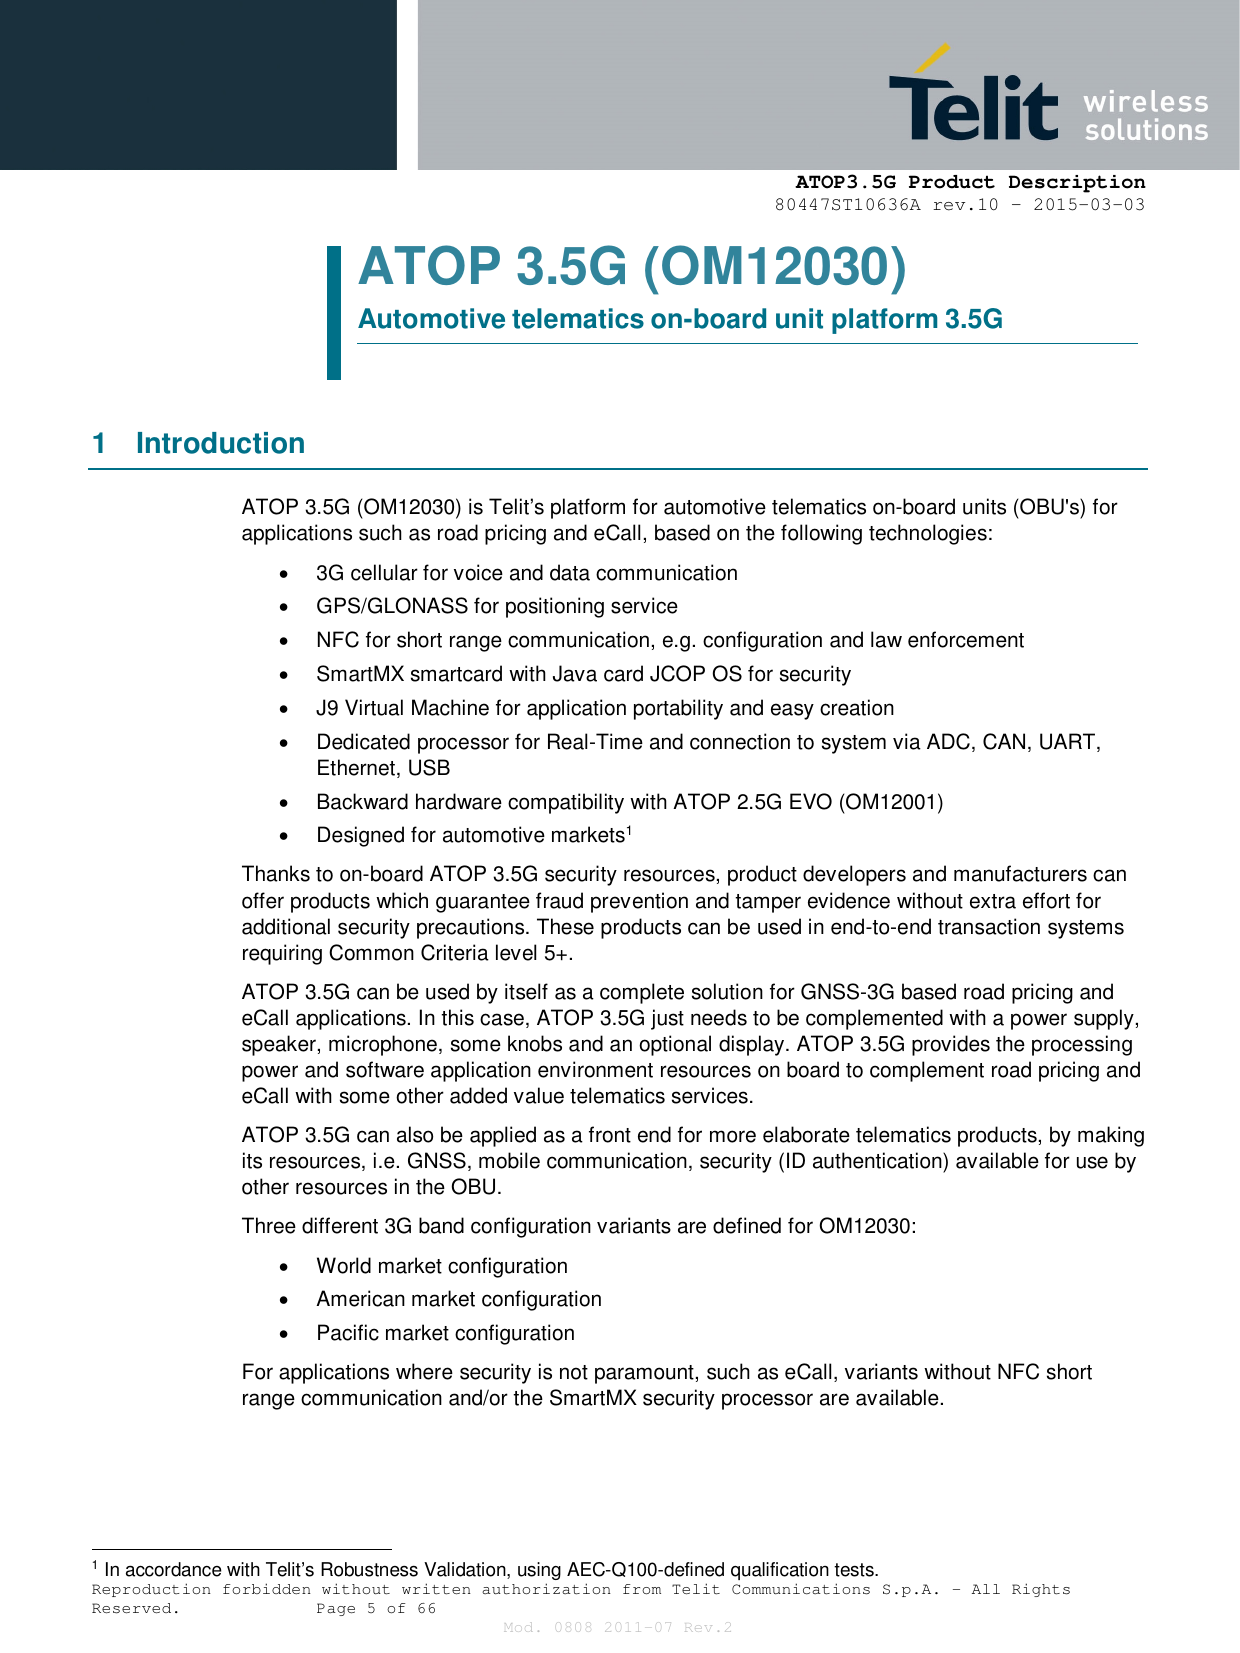      ATOP3.5G Product Description   80447ST10636A rev.10 – 2015-03-03  Reproduction forbidden without written authorization from Telit Communications S.p.A. - All Rights Reserved.    Page 5 of 66 Mod. 0808 2011-07 Rev.2 ATOP 3.5G (OM12030) Automotive telematics on-board unit platform 3.5G   1  Introduction ATOP 3.5G (OM12030) is Telit’s platform for automotive telematics on-board units (OBU&apos;s) for applications such as road pricing and eCall, based on the following technologies:   3G cellular for voice and data communication   GPS/GLONASS for positioning service   NFC for short range communication, e.g. configuration and law enforcement   SmartMX smartcard with Java card JCOP OS for security   J9 Virtual Machine for application portability and easy creation   Dedicated processor for Real-Time and connection to system via ADC, CAN, UART, Ethernet, USB   Backward hardware compatibility with ATOP 2.5G EVO (OM12001)   Designed for automotive markets1 Thanks to on-board ATOP 3.5G security resources, product developers and manufacturers can offer products which guarantee fraud prevention and tamper evidence without extra effort for additional security precautions. These products can be used in end-to-end transaction systems requiring Common Criteria level 5+. ATOP 3.5G can be used by itself as a complete solution for GNSS-3G based road pricing and eCall applications. In this case, ATOP 3.5G just needs to be complemented with a power supply, speaker, microphone, some knobs and an optional display. ATOP 3.5G provides the processing power and software application environment resources on board to complement road pricing and eCall with some other added value telematics services. ATOP 3.5G can also be applied as a front end for more elaborate telematics products, by making its resources, i.e. GNSS, mobile communication, security (ID authentication) available for use by other resources in the OBU. Three different 3G band configuration variants are defined for OM12030:   World market configuration   American market configuration   Pacific market configuration For applications where security is not paramount, such as eCall, variants without NFC short range communication and/or the SmartMX security processor are available.                                                   1 In accordance with Telit’s Robustness Validation, using AEC-Q100-defined qualification tests. 